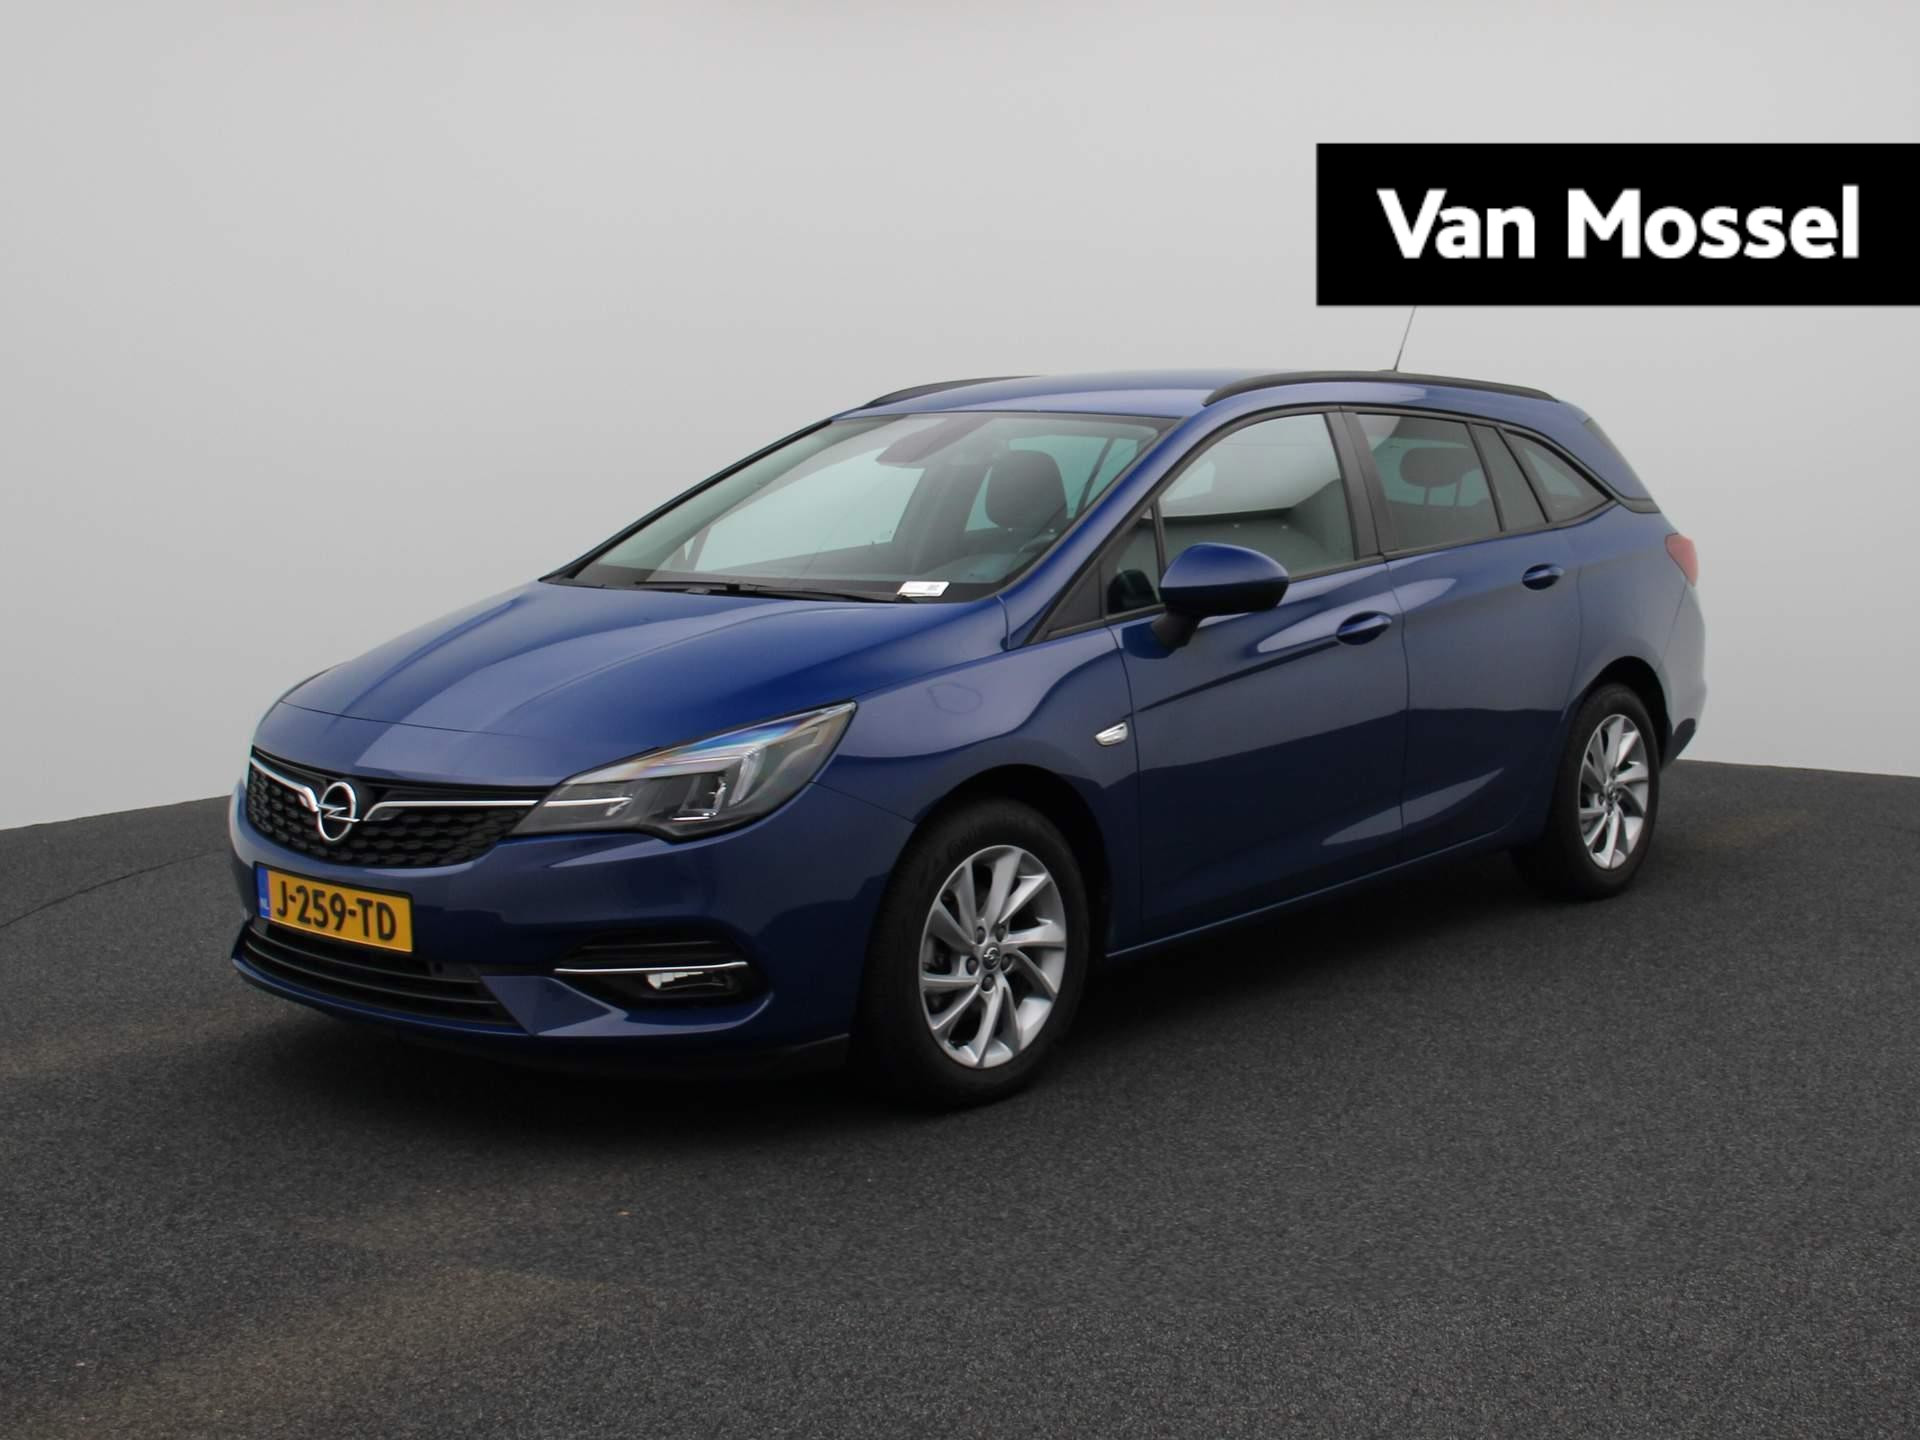 Opel Astra Sports Tourer 1.5 CDTI Business Edition | Apple Carplay/Android Auto | Navi | Airco | Cruise Control | LED | Start/Stop Systeem | Stuurwiel Multifunctioneel | 12 Maanden BOVAG |